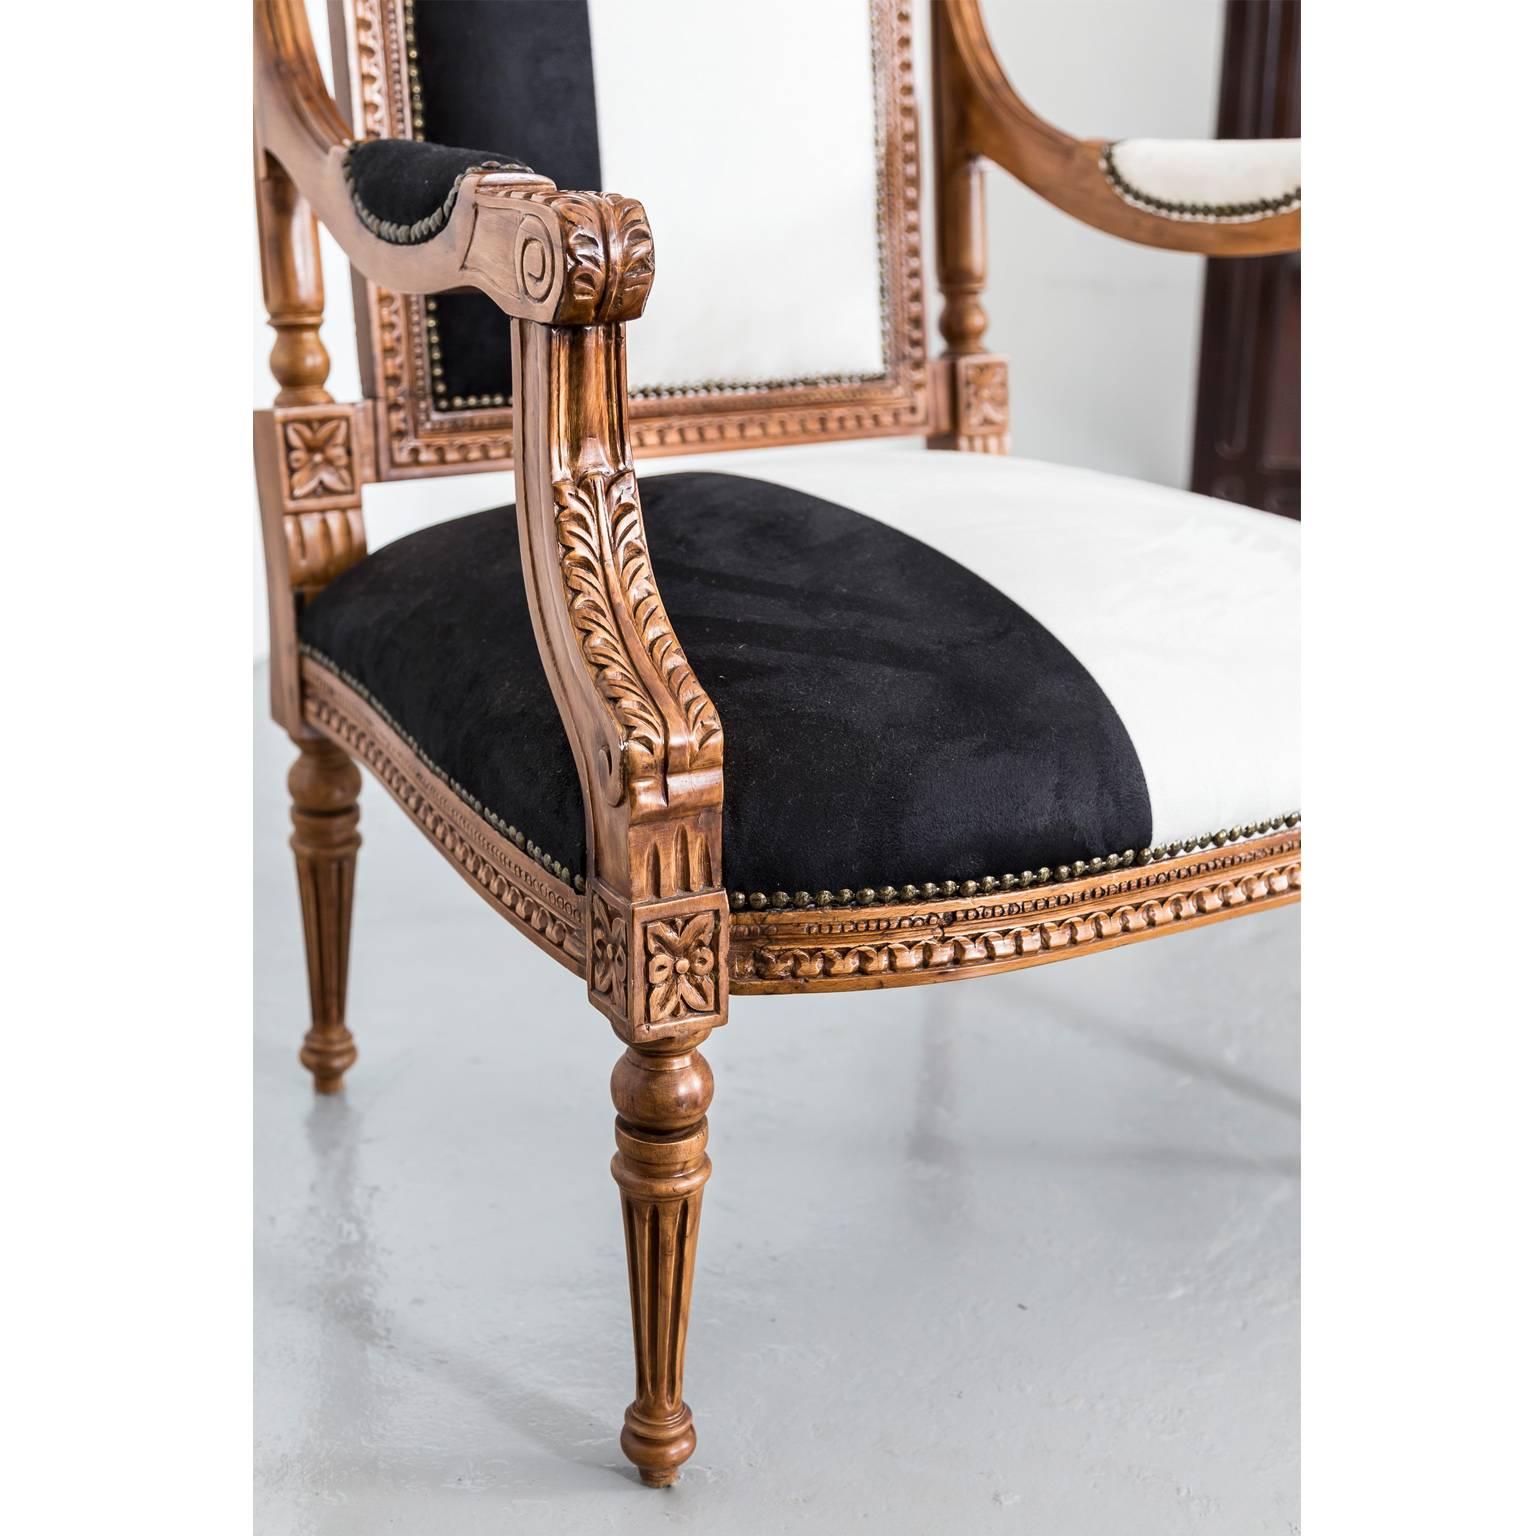 A pair of British colonial open armchairs in Louis XVI style. 
The high back consists of a central upholstered panel that is surmounted by a shaped top rail, pierced and carved at centre with a floral design. Each upright supports a small finial